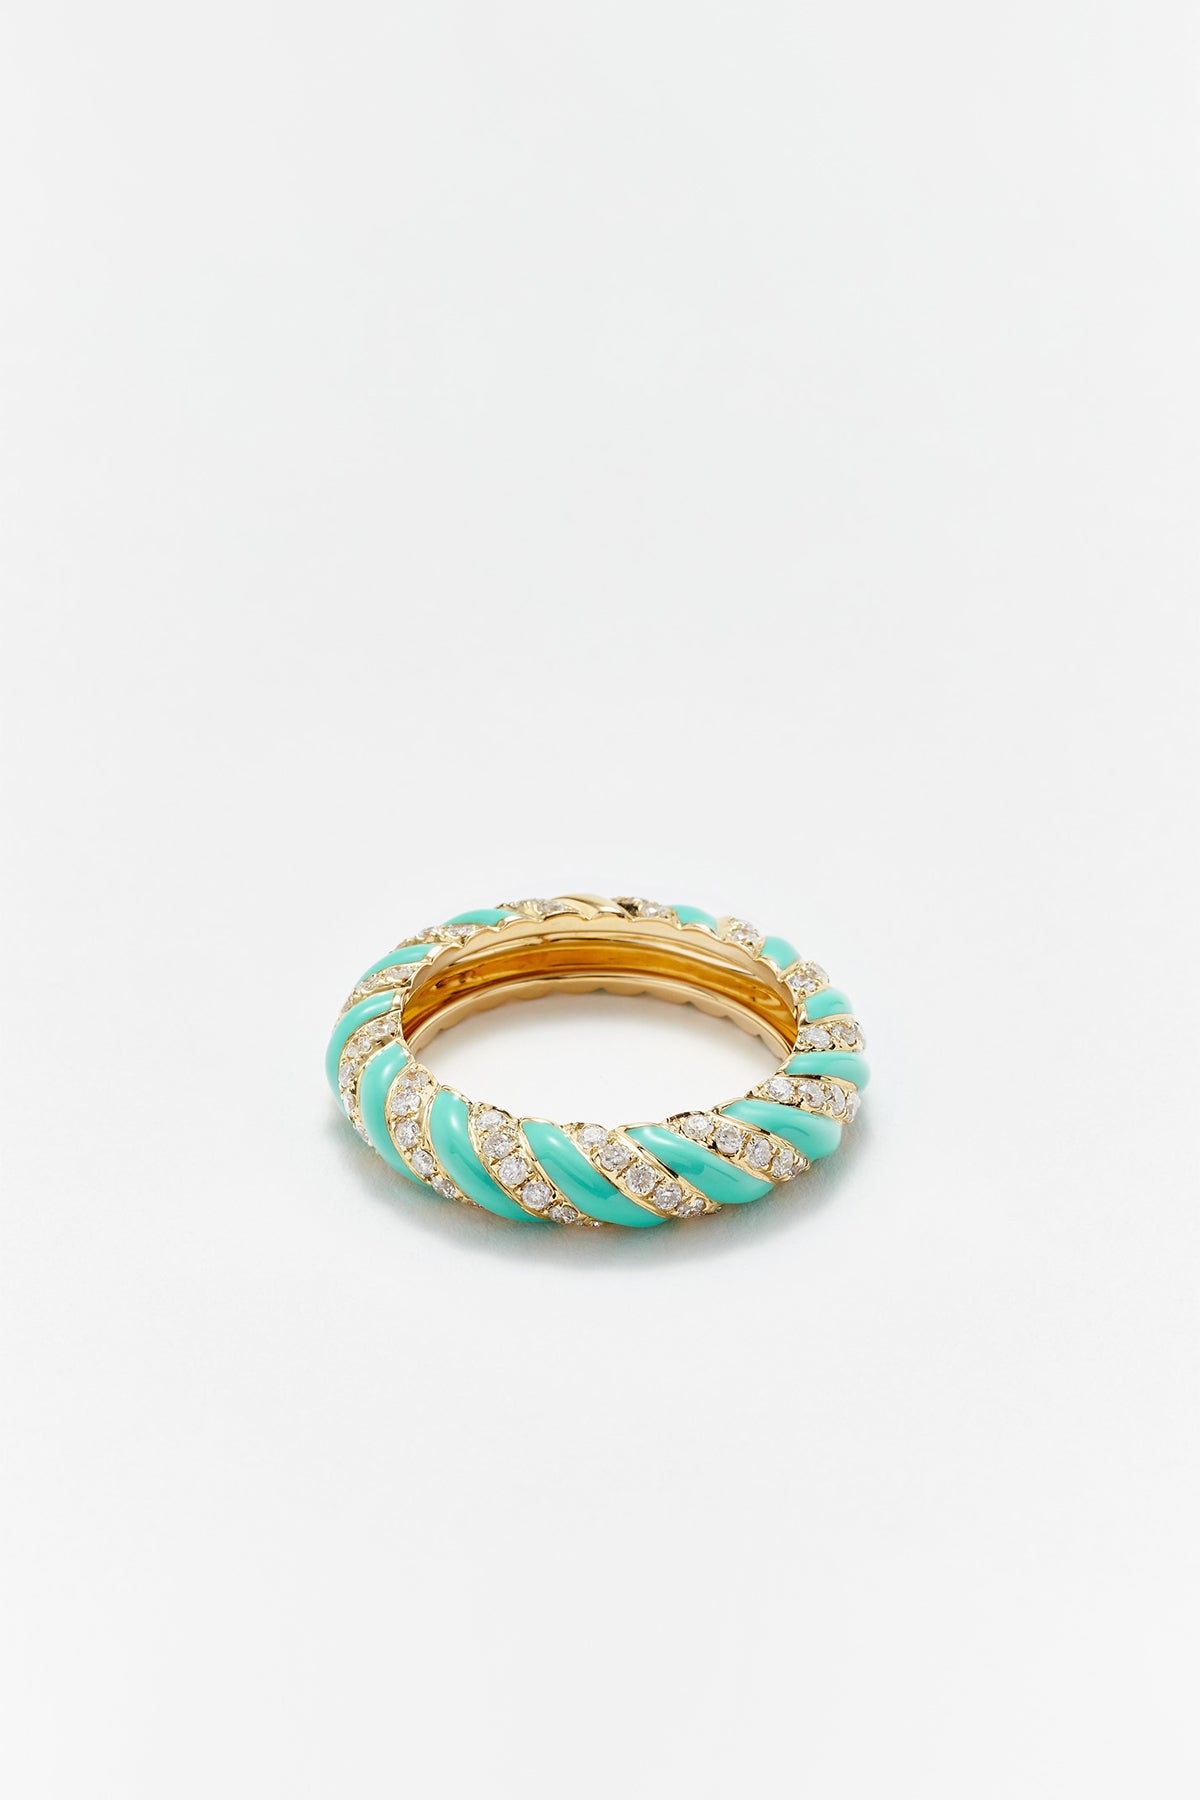 YVONNE LÉON | TWISTED TURQUOISE RING